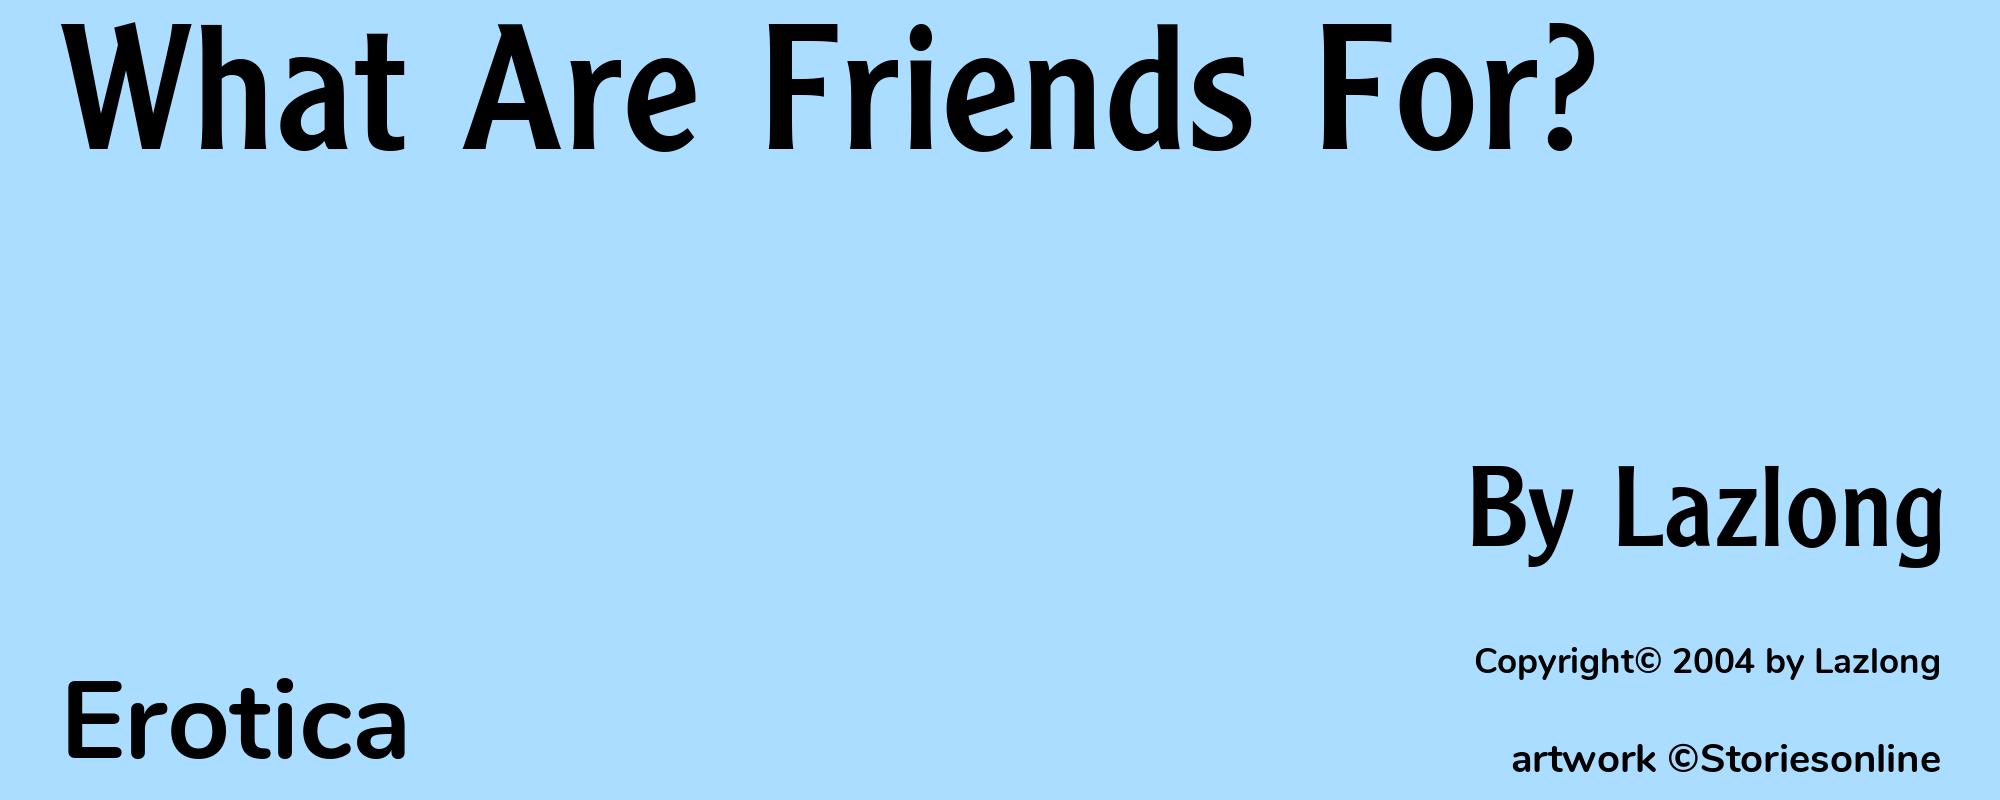 What Are Friends For? - Cover